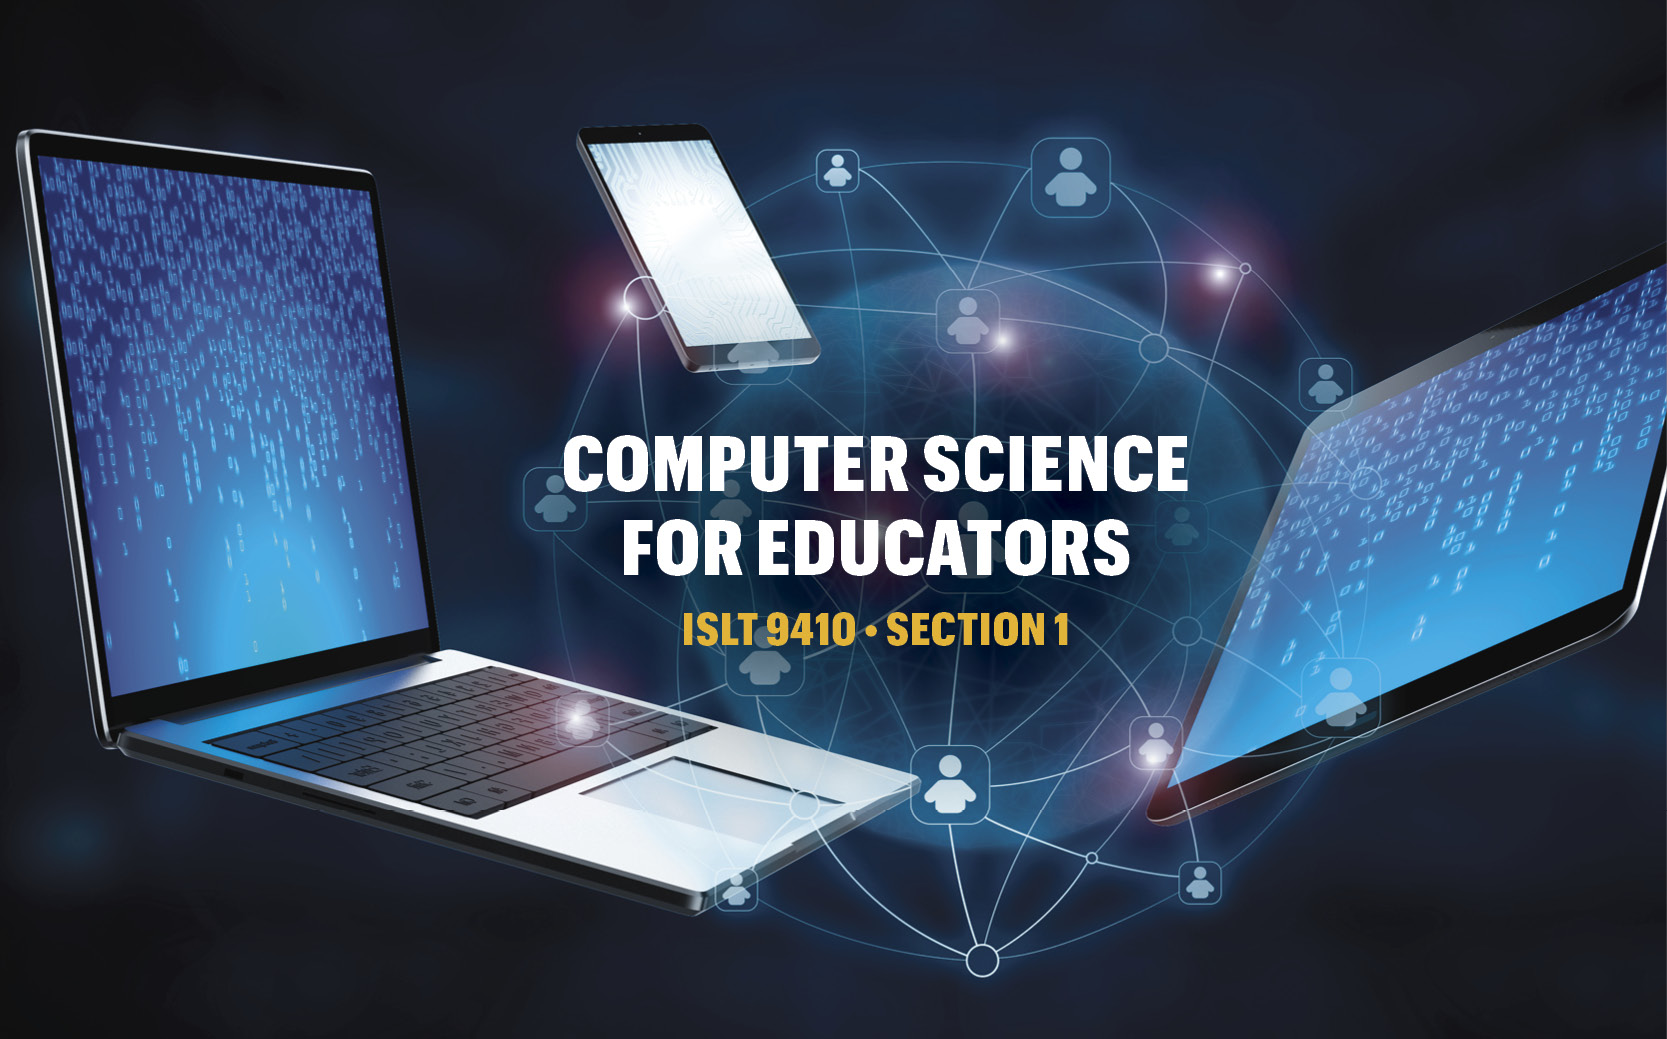 Online Course for Computer Science Proper Qualification Now Available